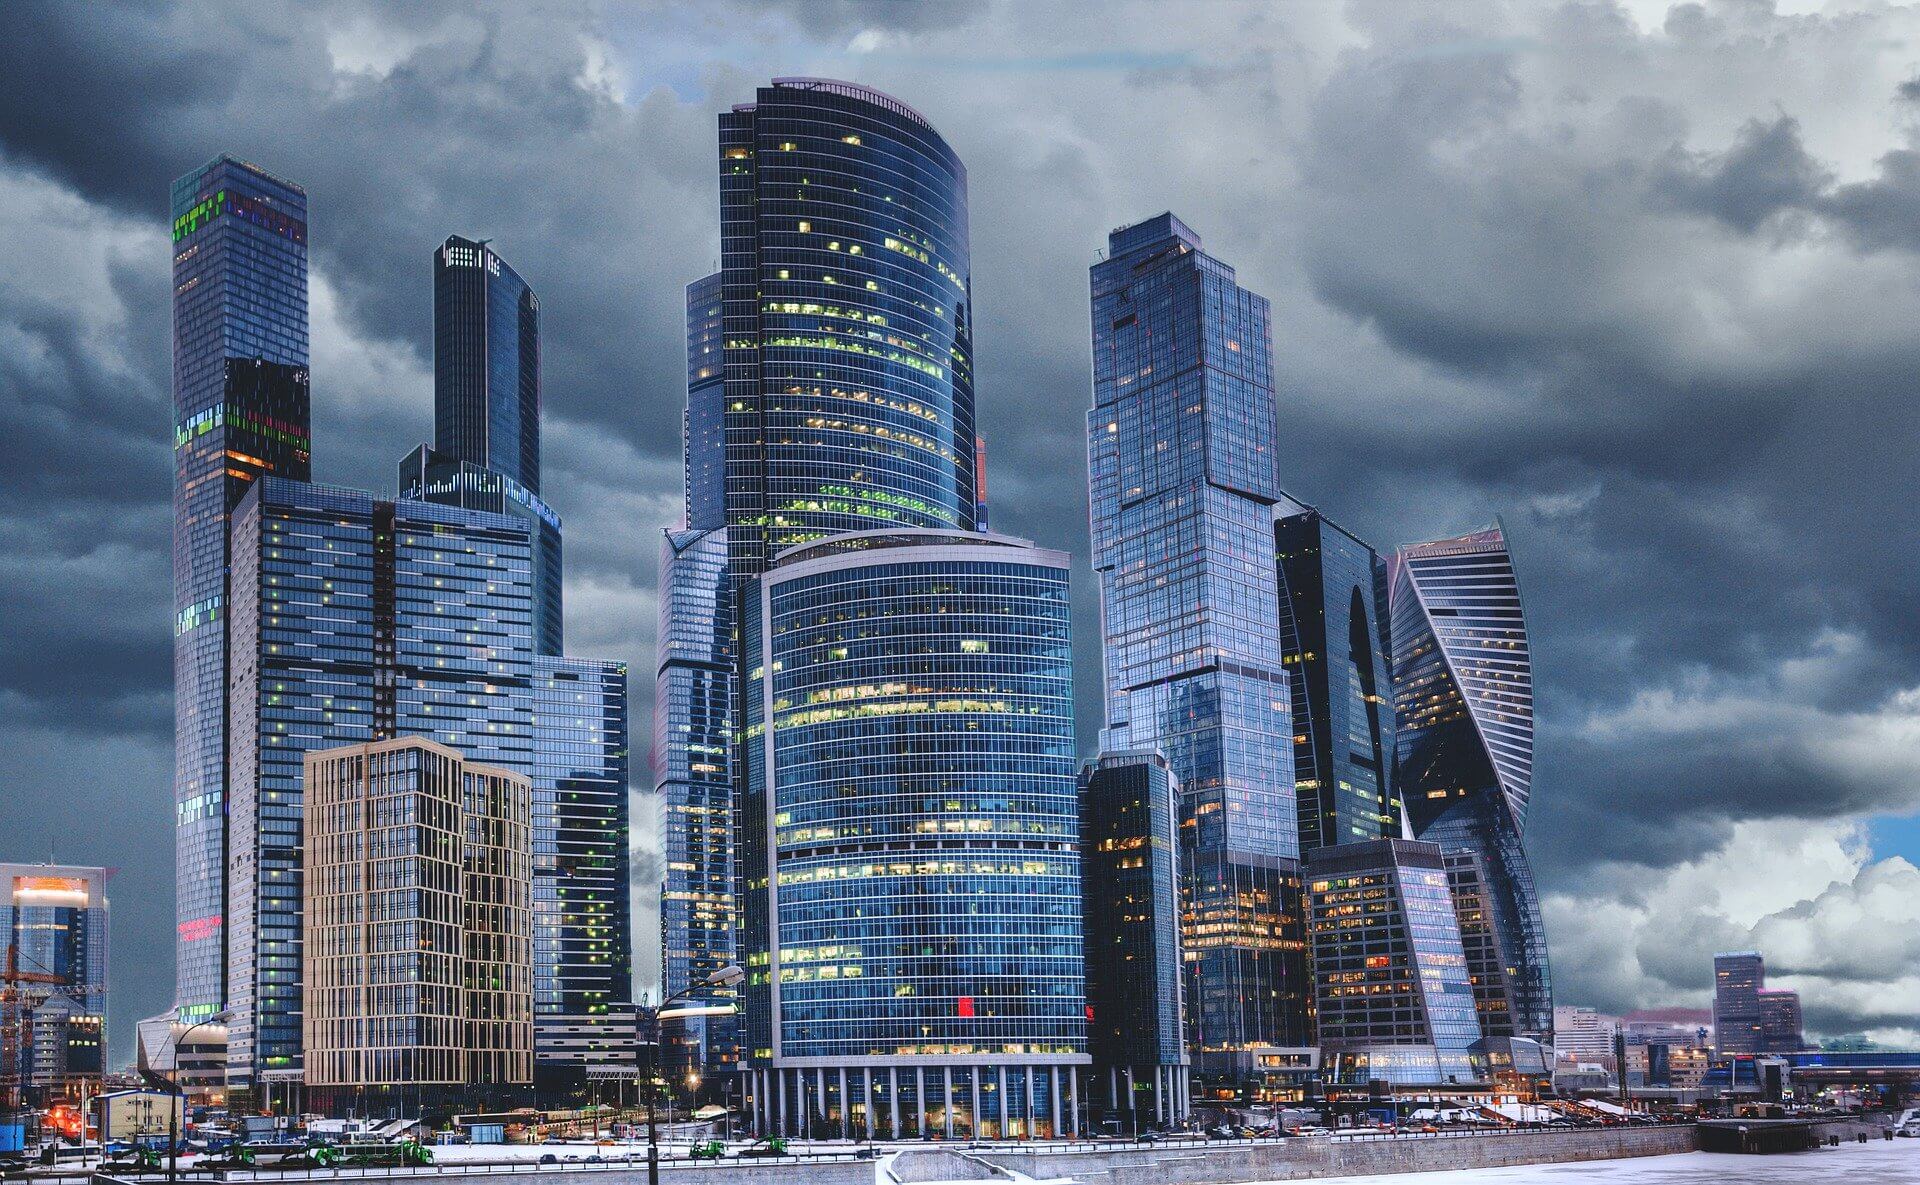 moscow's city